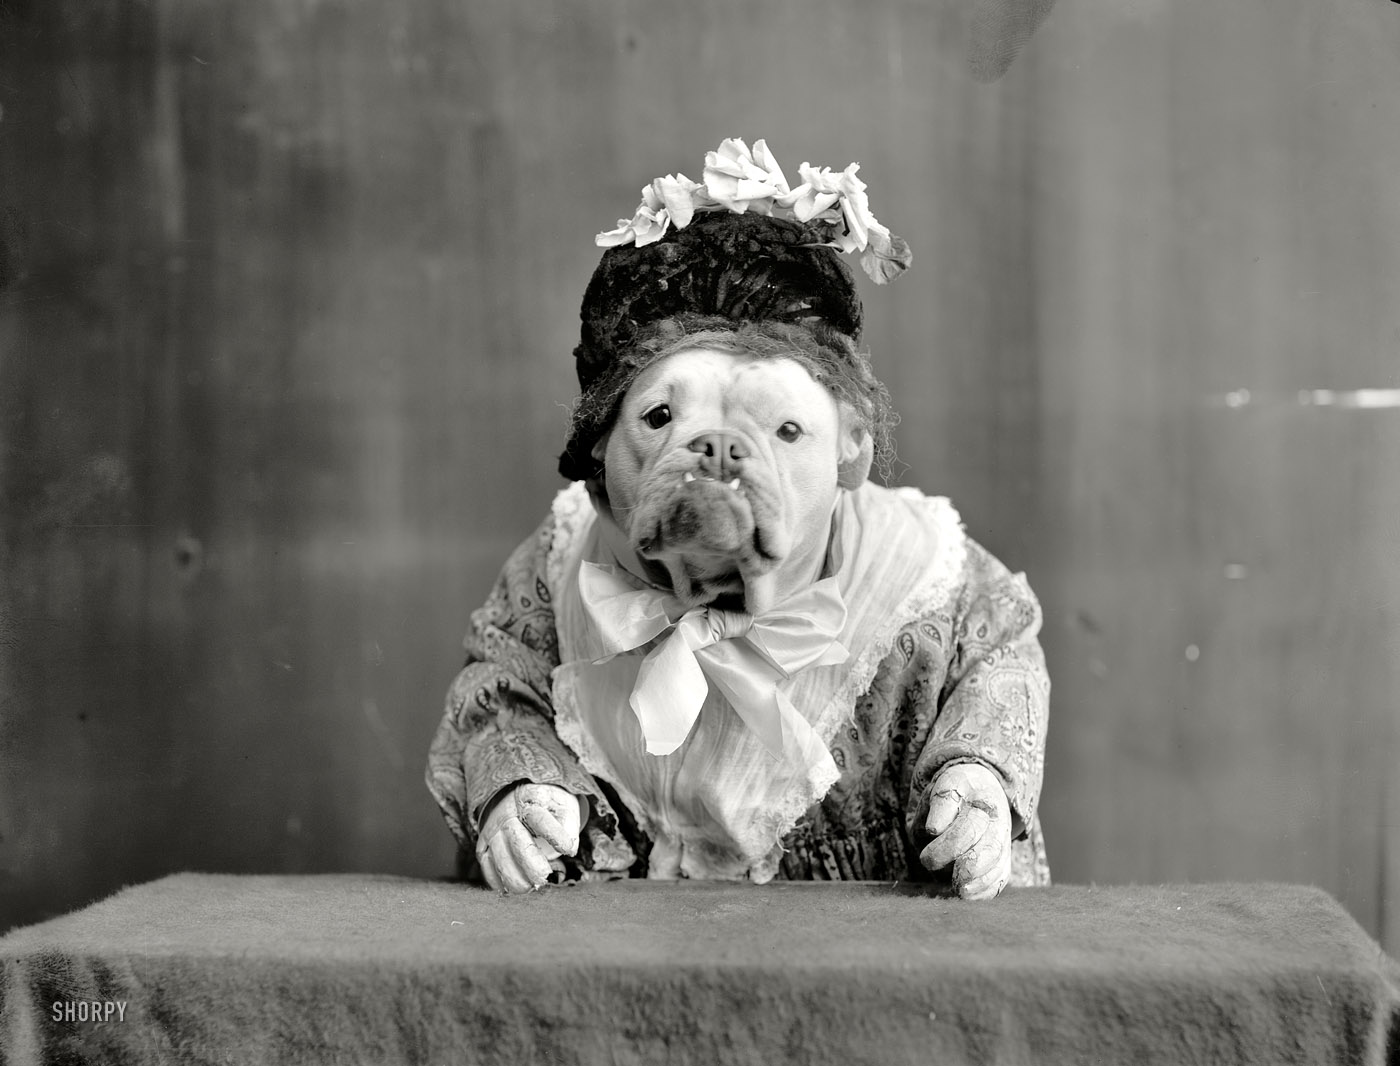 Circa 1905. "The Missis." A real you-know-what, with fake hands. 8x10 inch dry plate glass negative, Detroit Publishing Company. View full size.